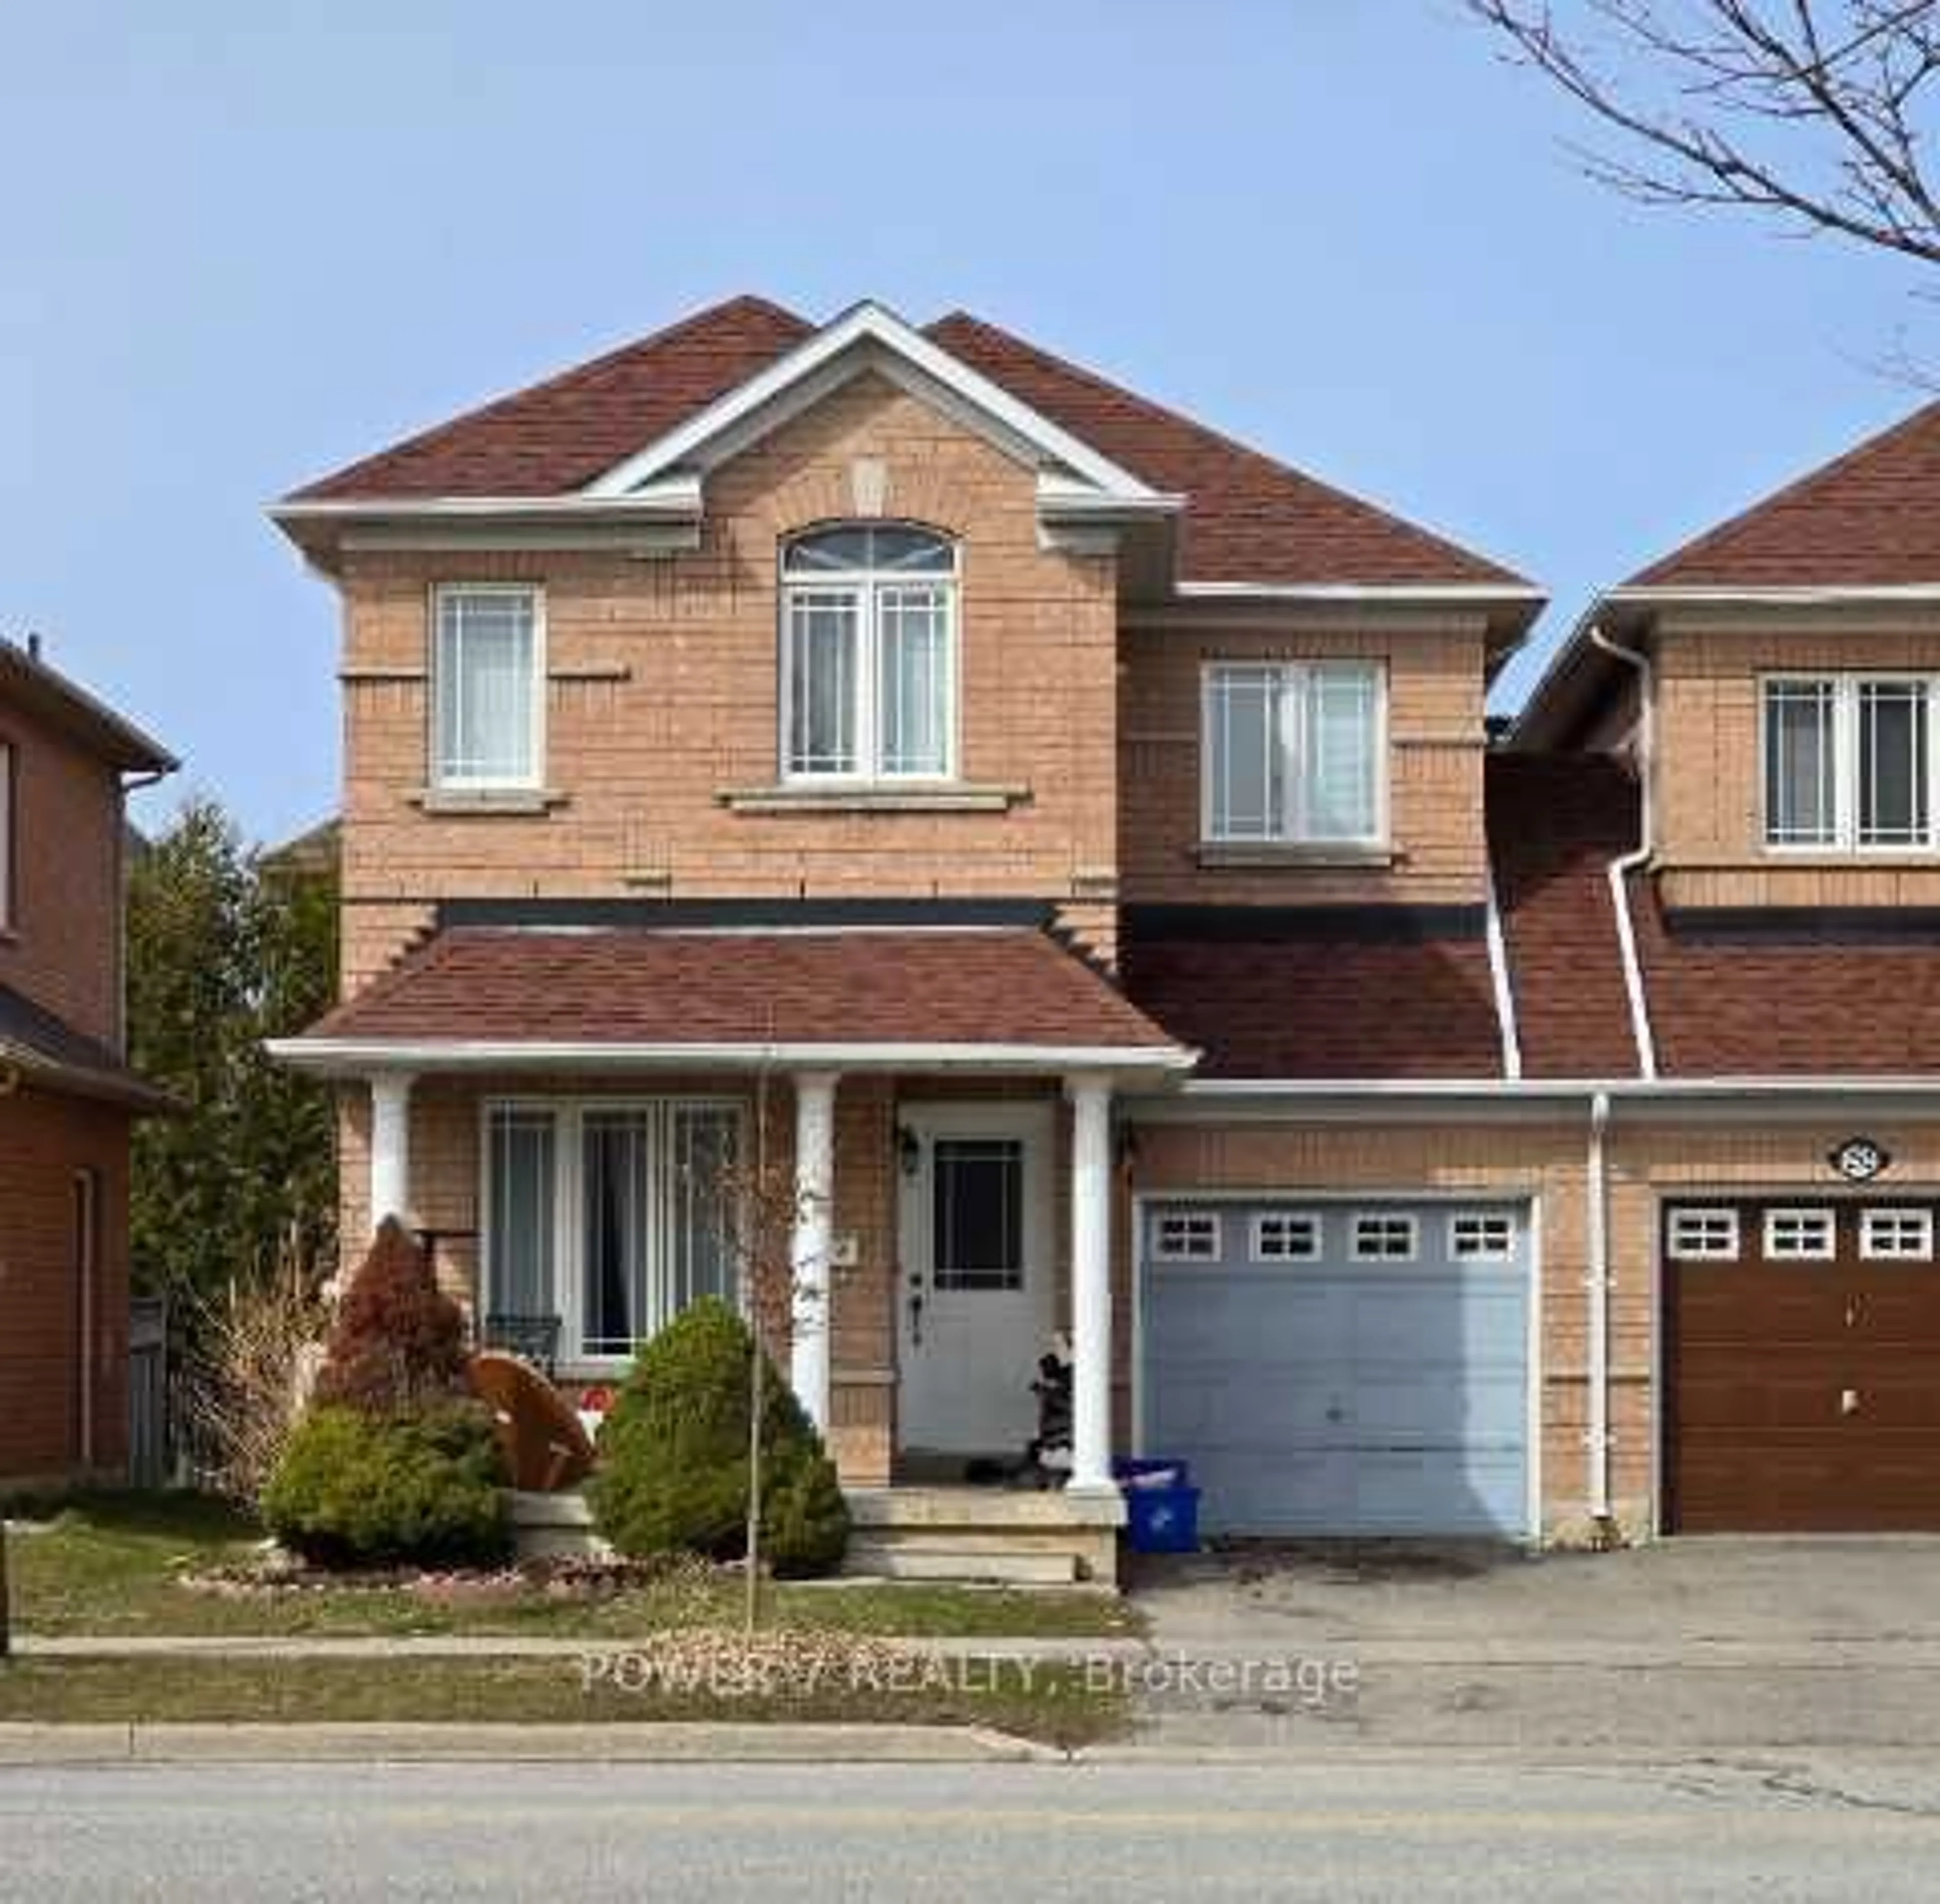 Home with brick exterior material for 250 Farmstead Rd, Richmond Hill Ontario L4S 2K5